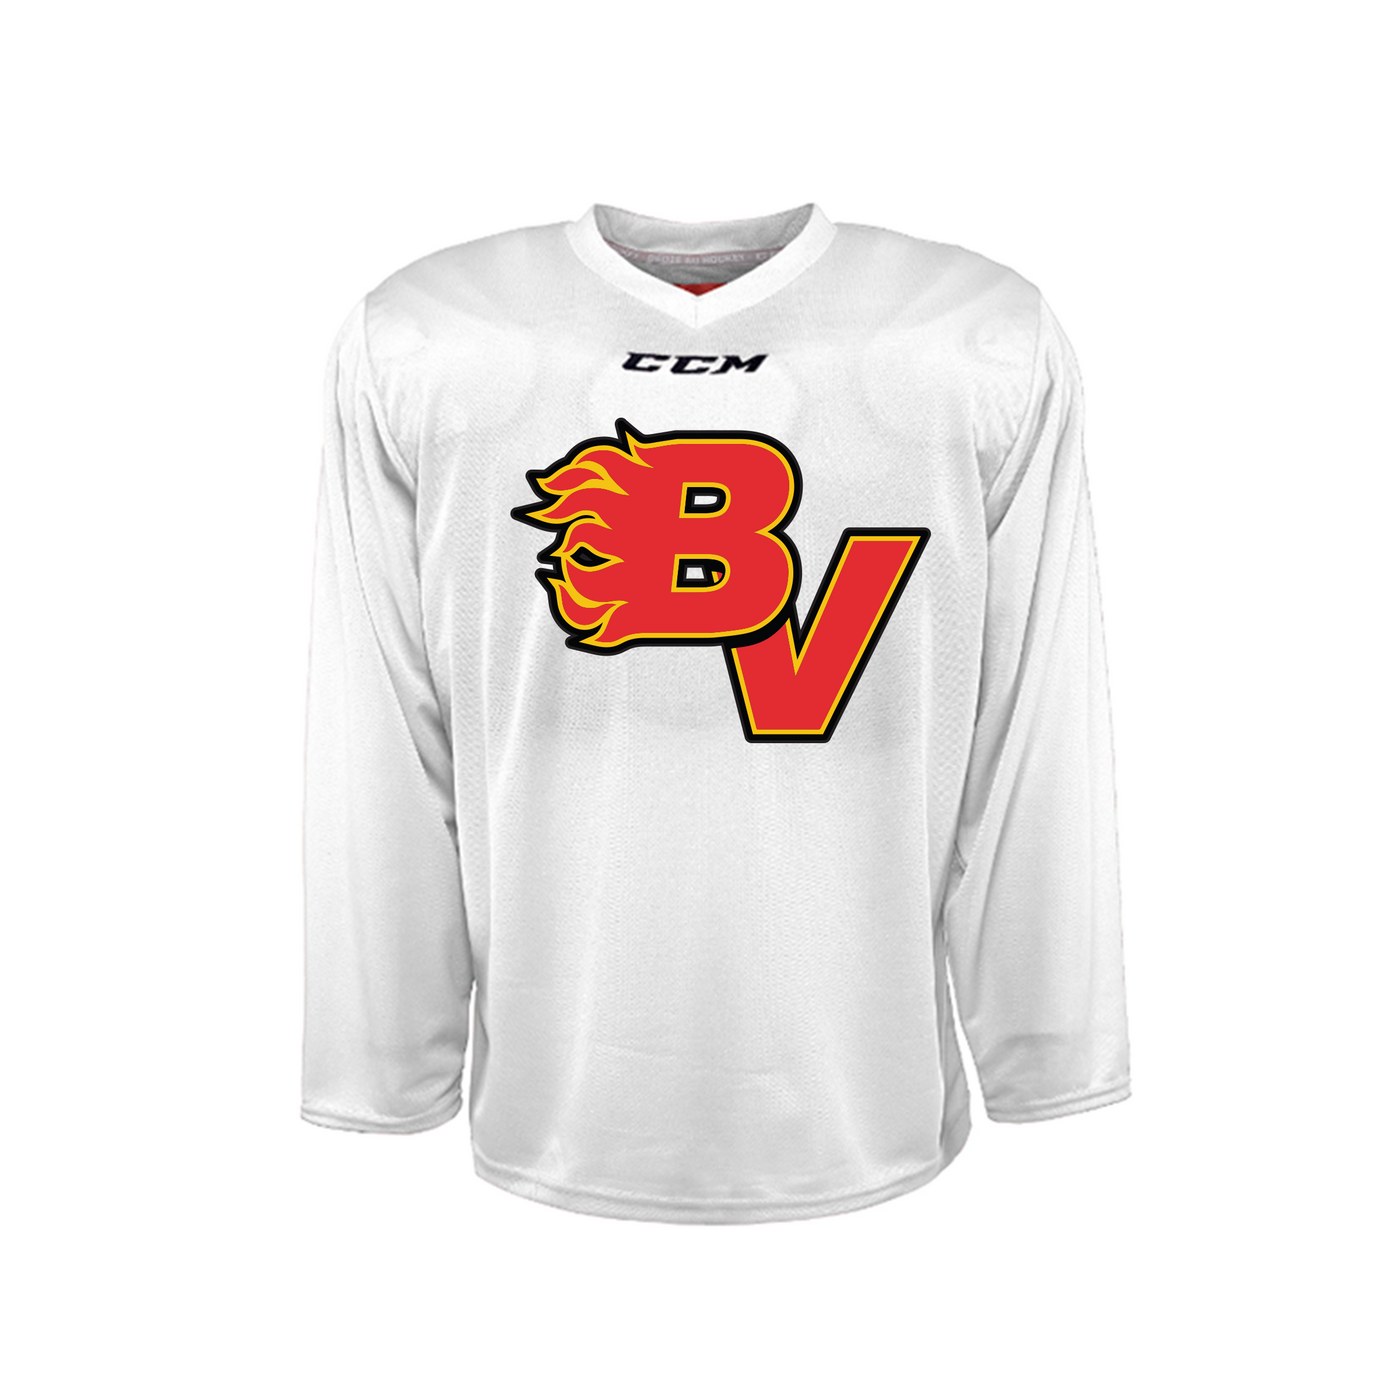 Bow Valley White Practice Jersey